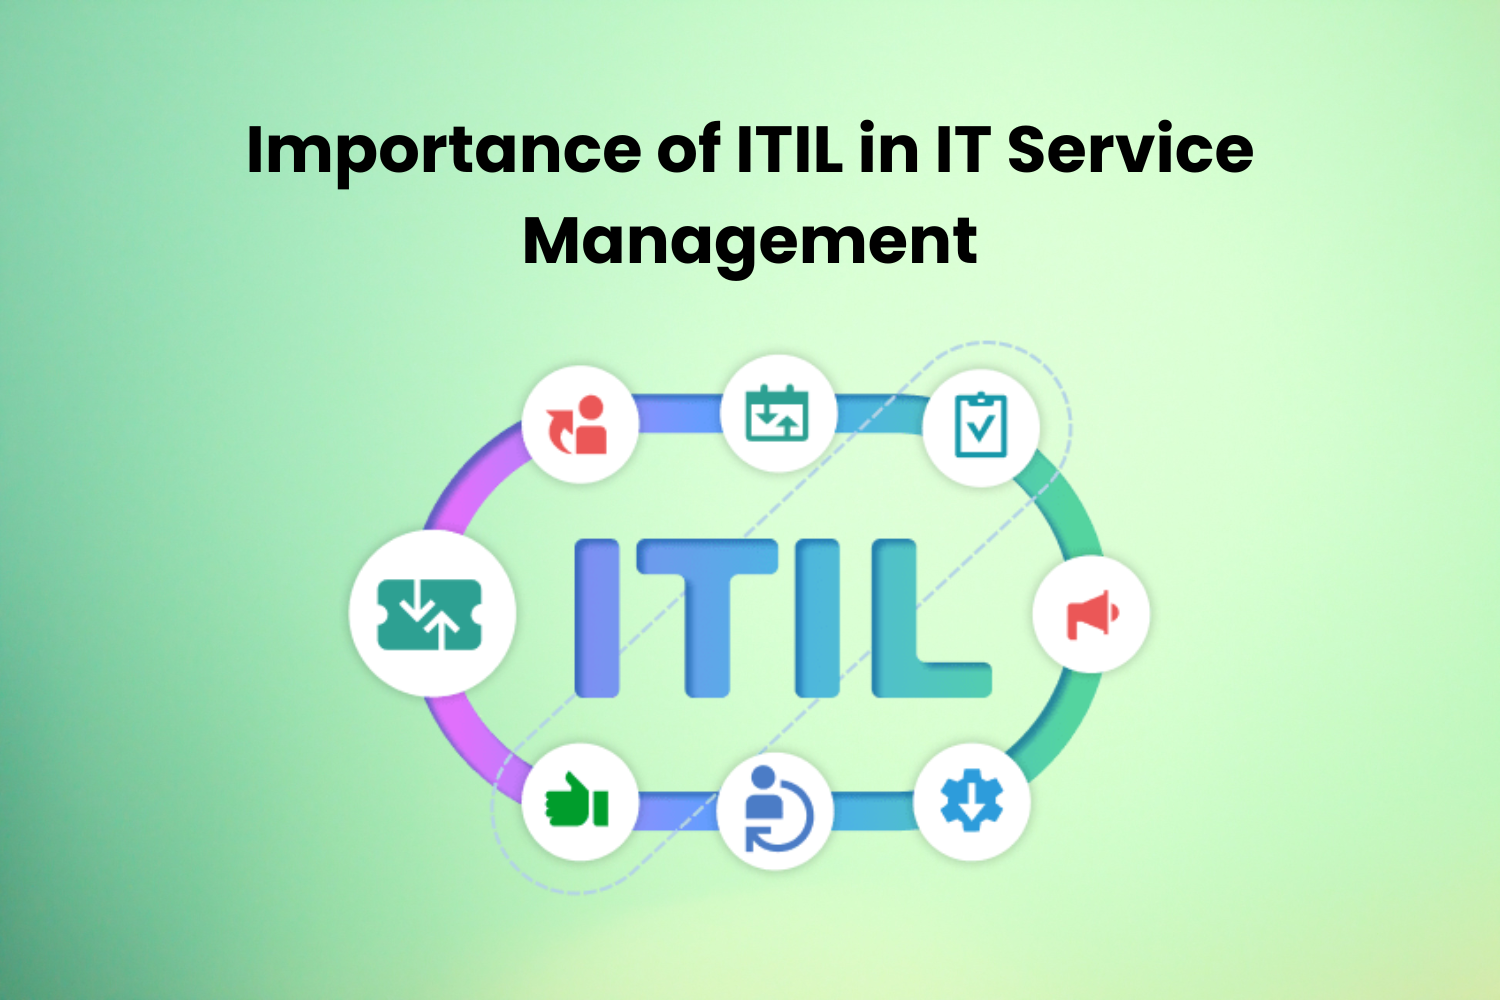 Importance of ITIL in IT Service Management